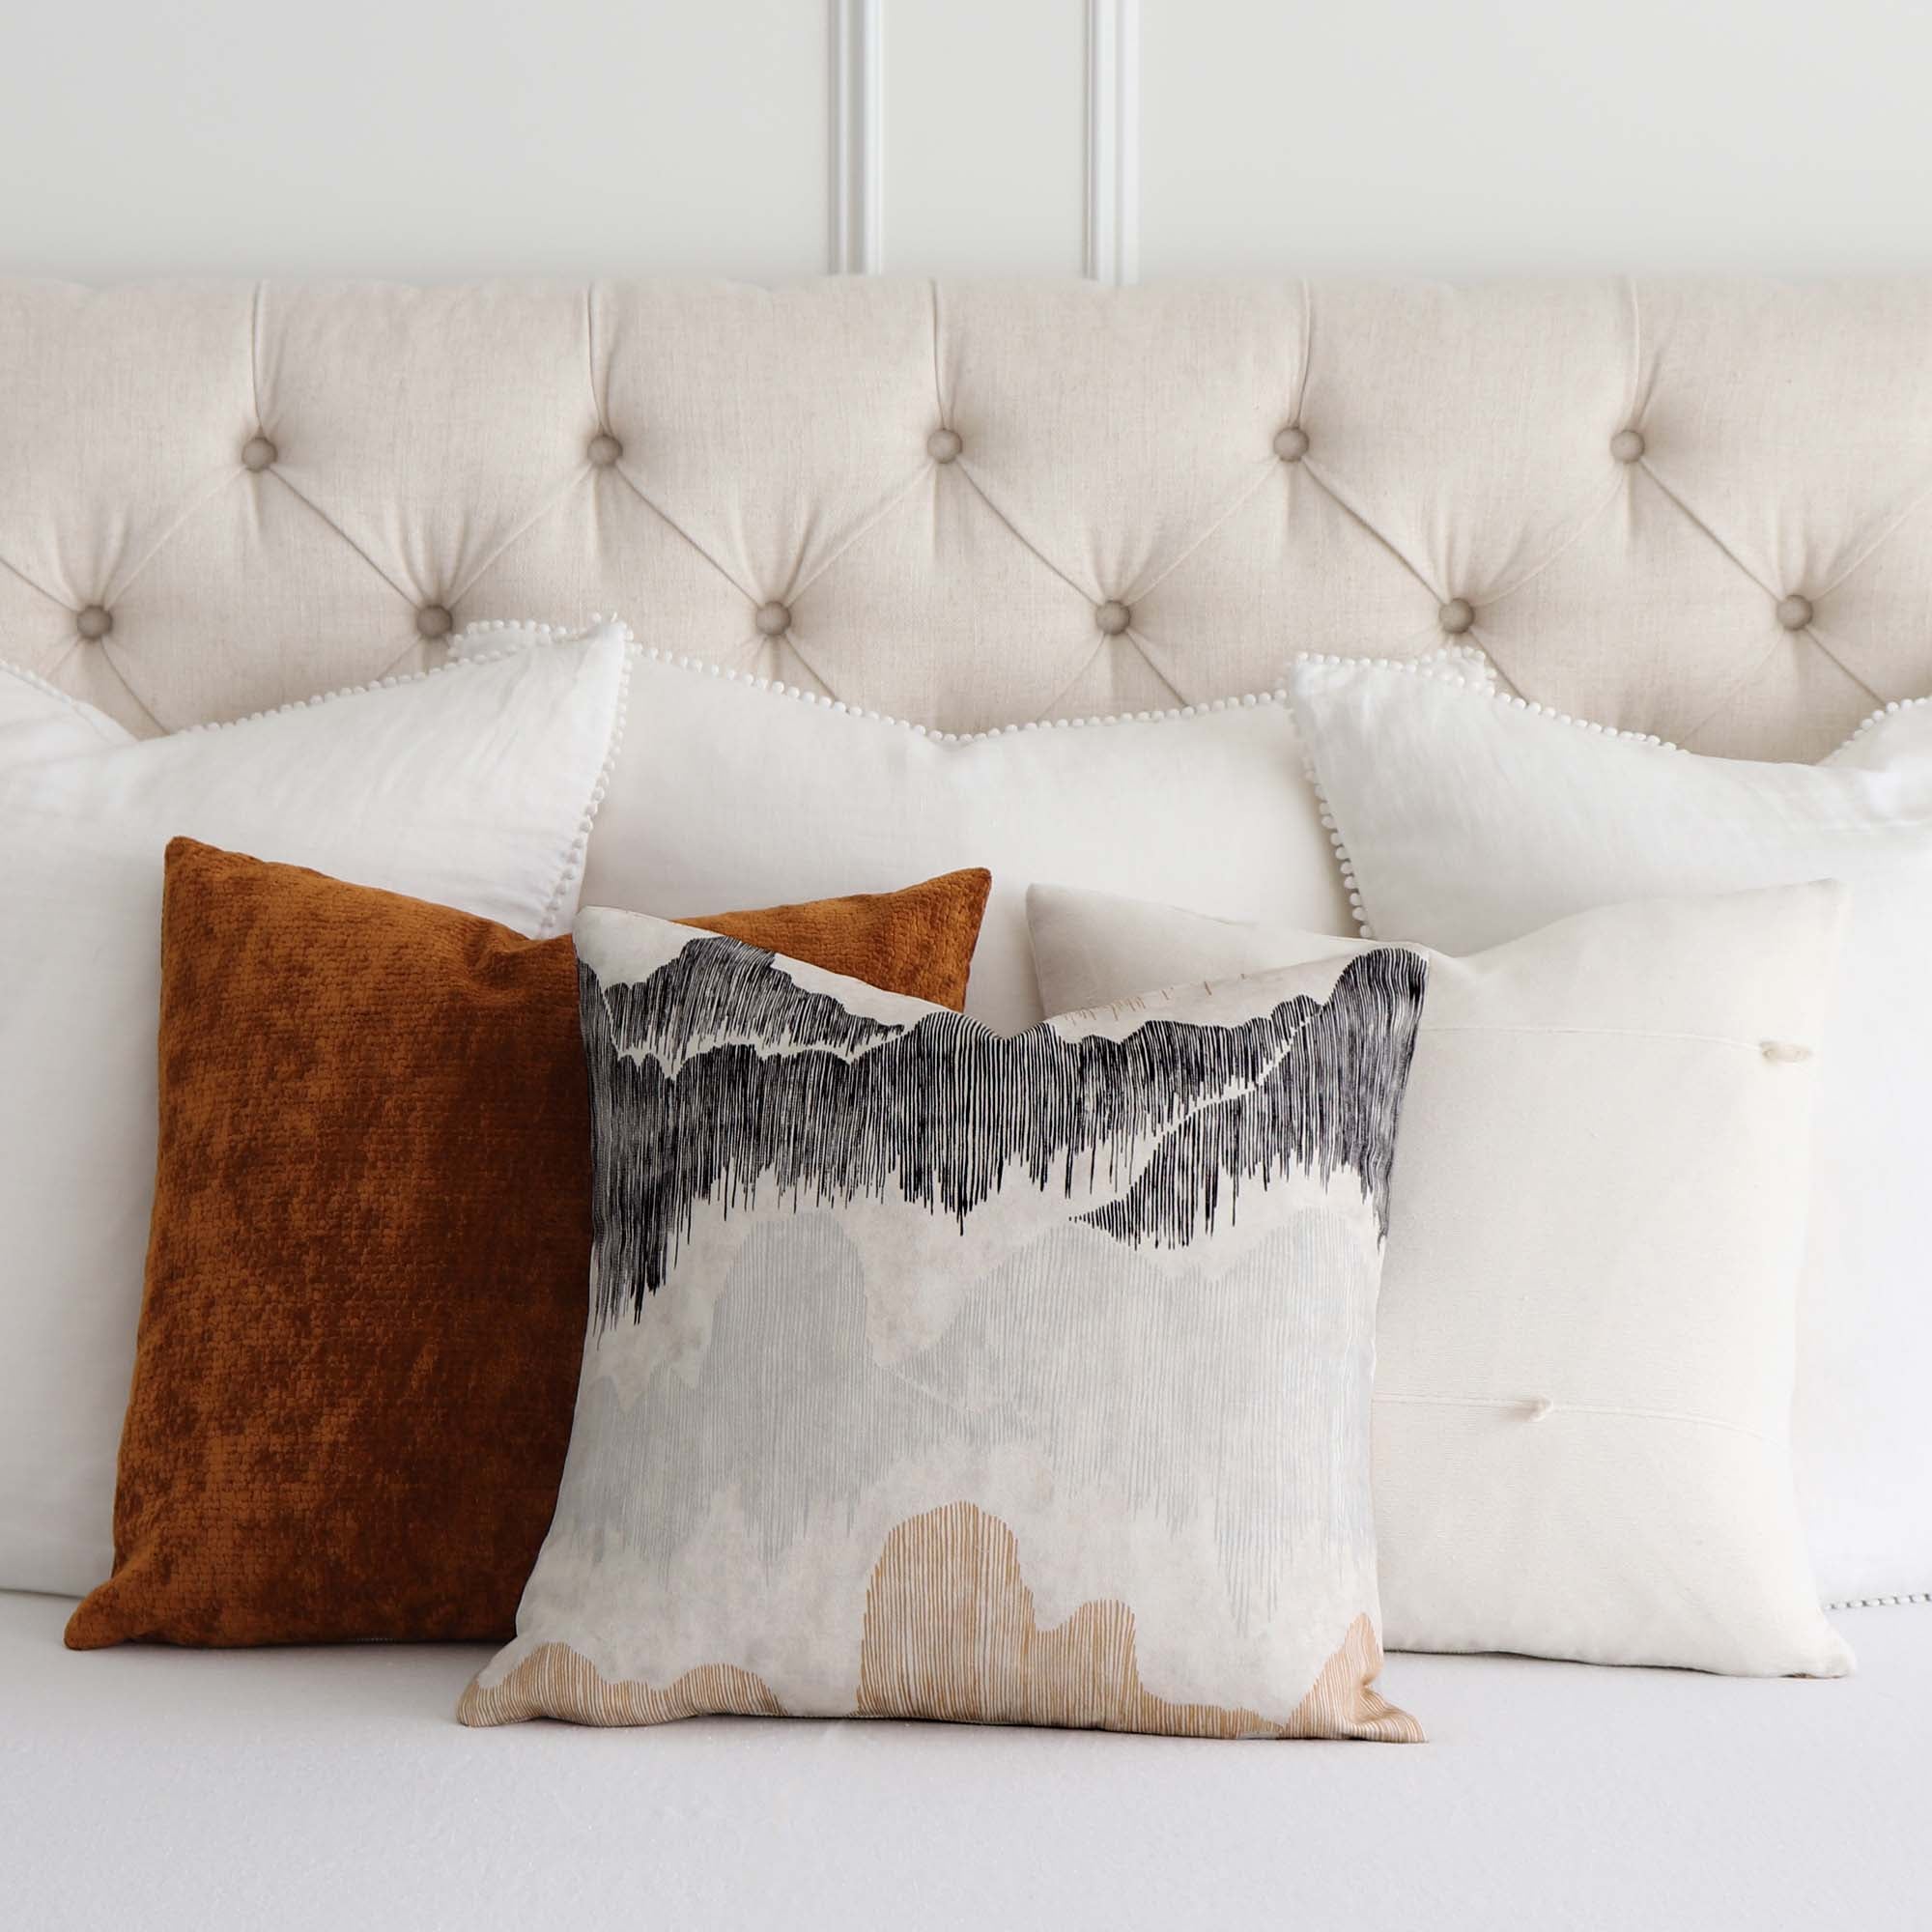 New Arrivals Chloe and Olive Designer Luxury Throw Pillow Covers